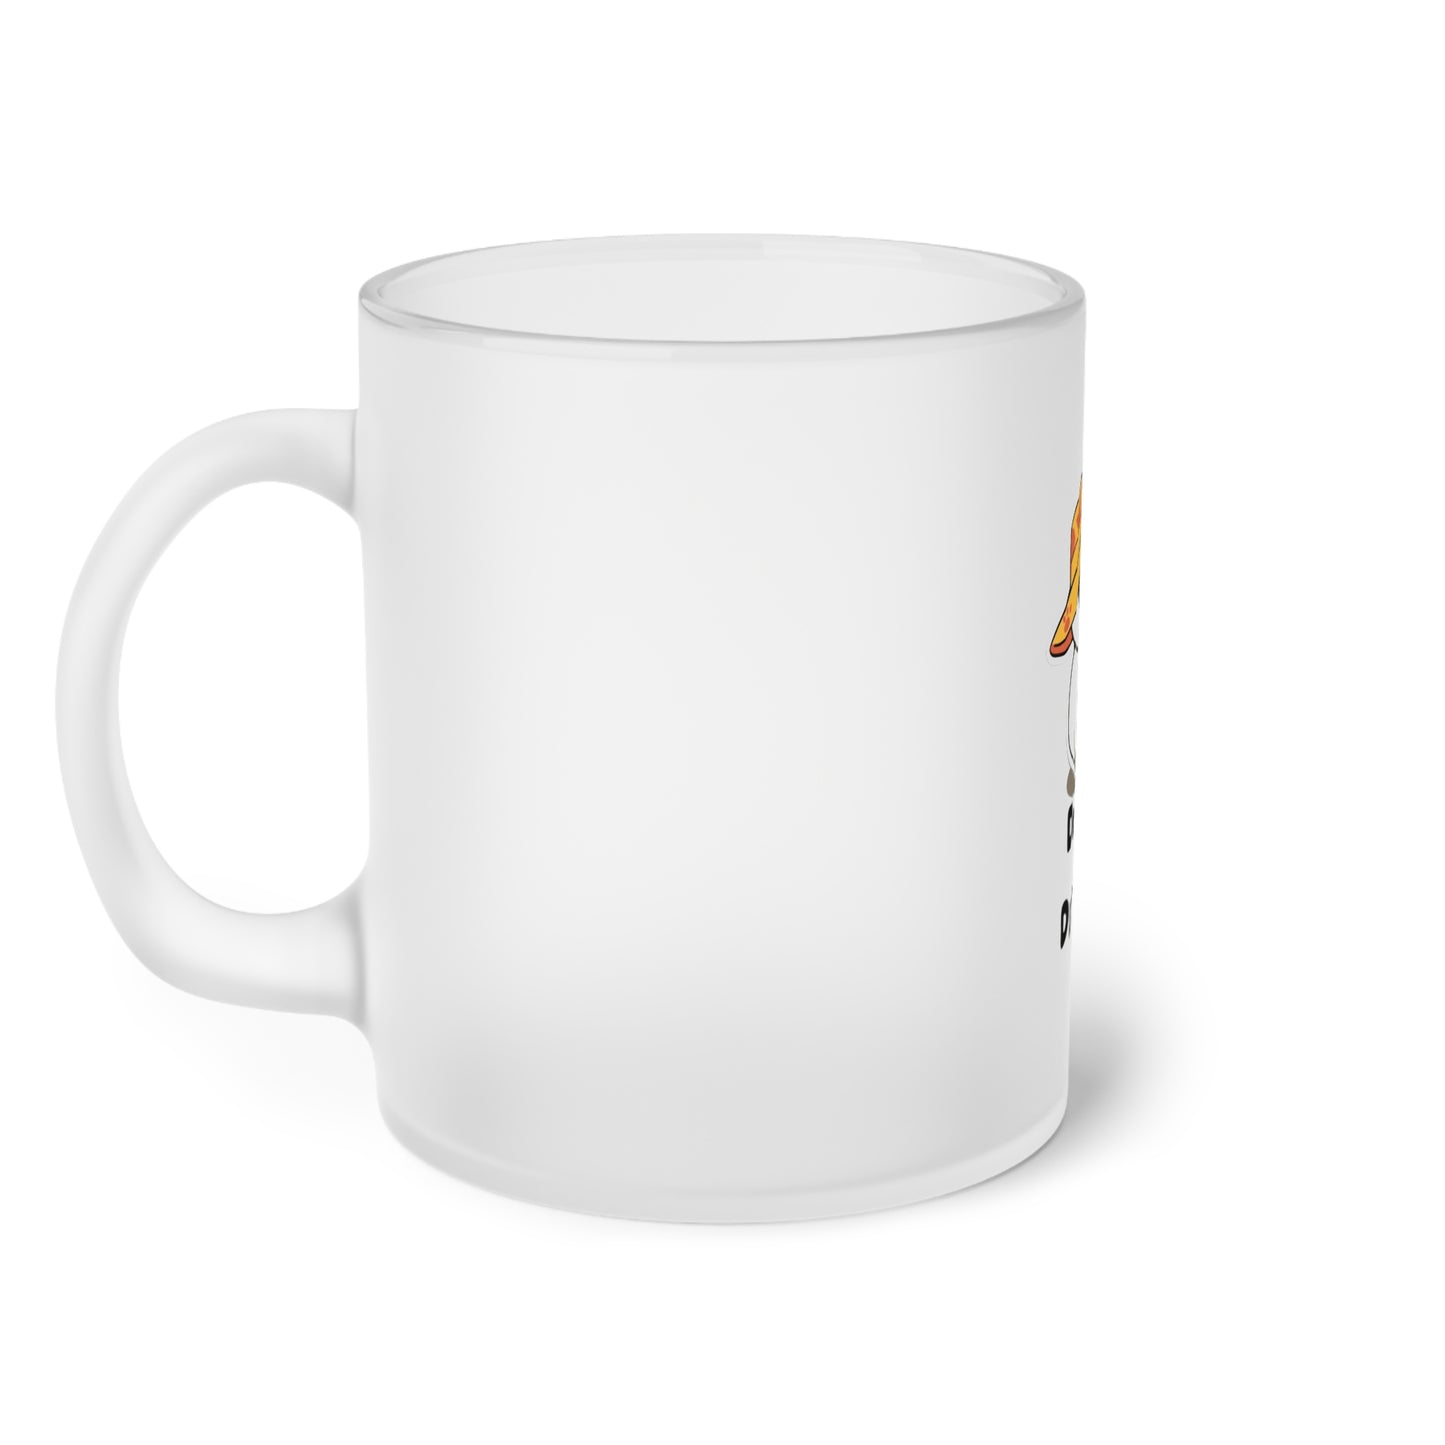 Do Not Disturb. . Frosted Glass Mug